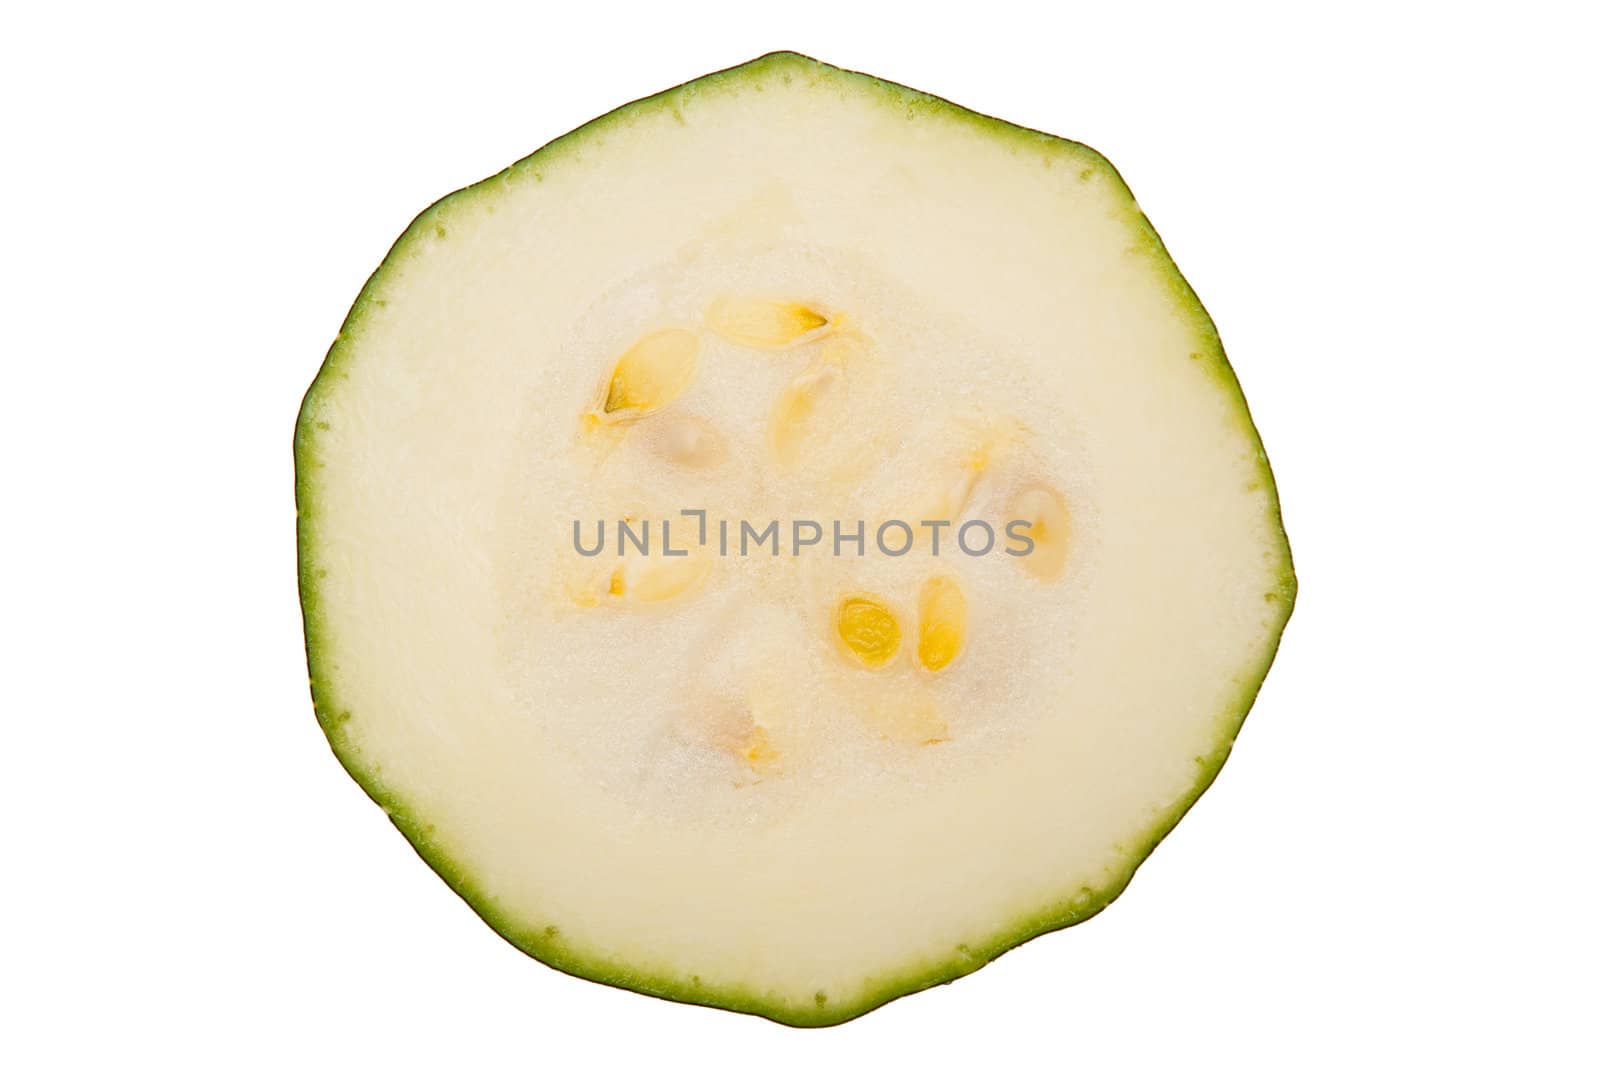 A courgette cross-section isolated on white